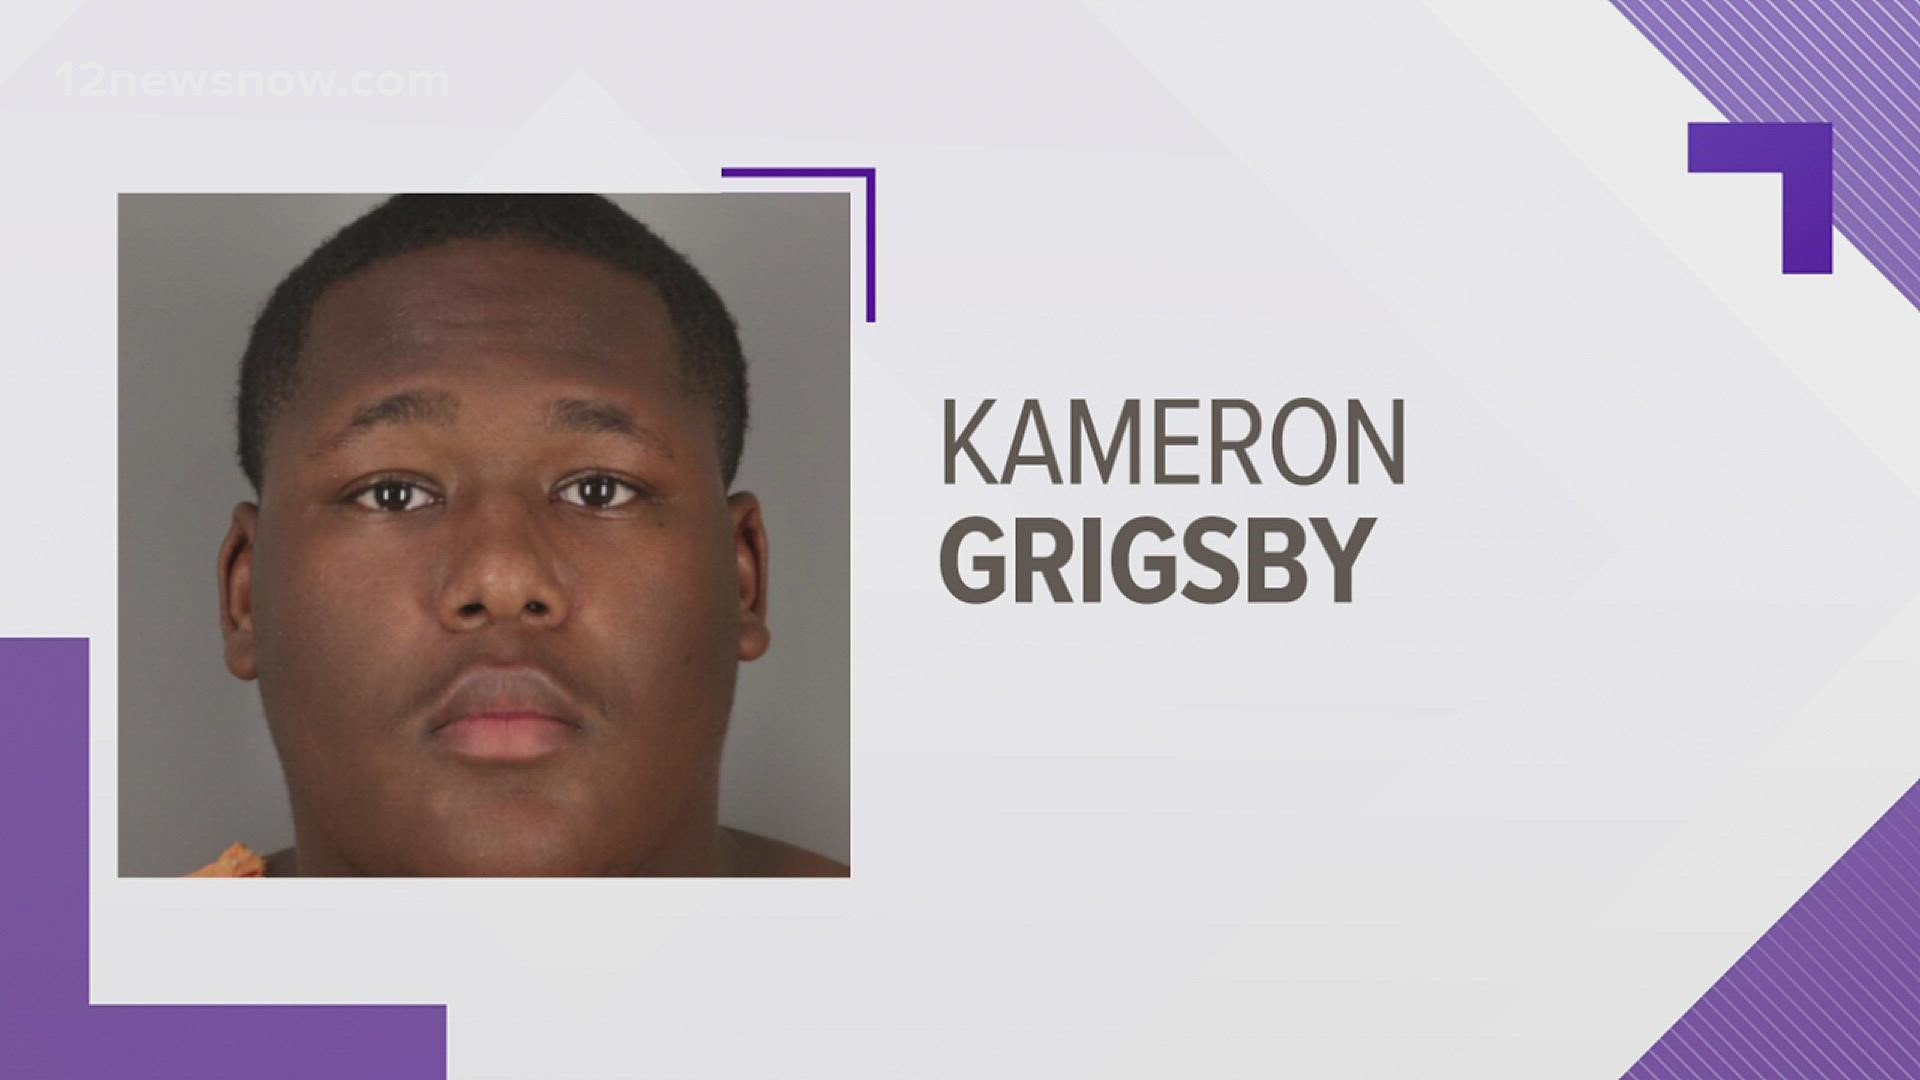 Kameron Grigsby is charged with first degree aggravated sexual assualt of a 5-year-old child.